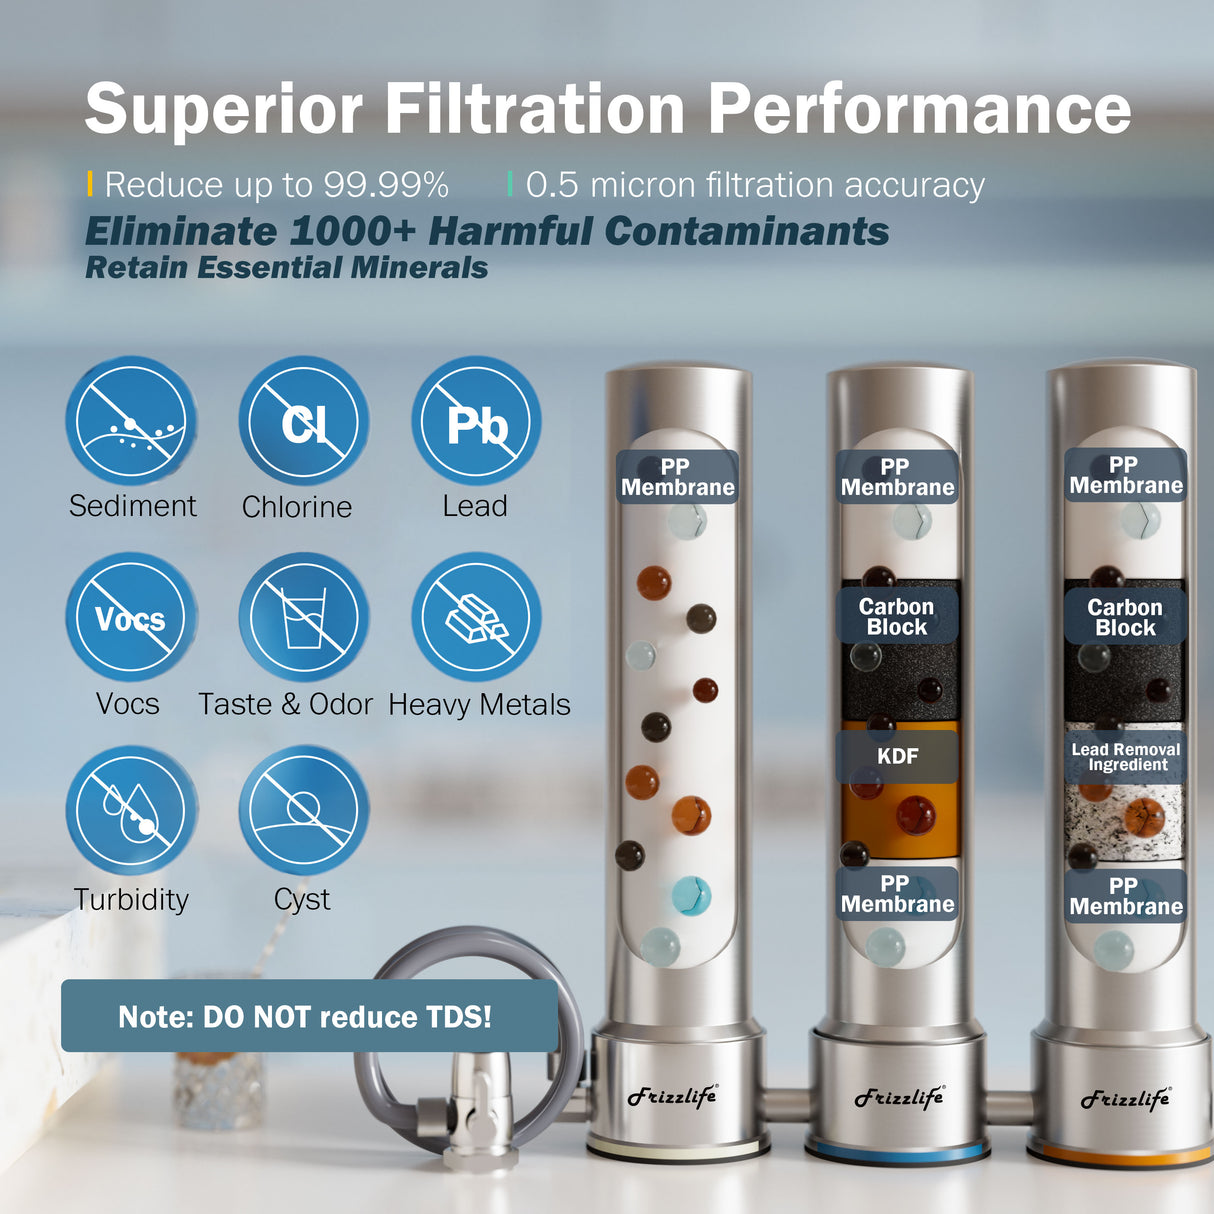 Frizzlife TS99 Countertop Water Filter System, 9-Stage Stainless Steel Faucet Water Filtration, 0.5 Micron NSF Certified Elements Reduces 99.99% Lead, Chlorine, Heavy Metals, Bad Taste & Odor